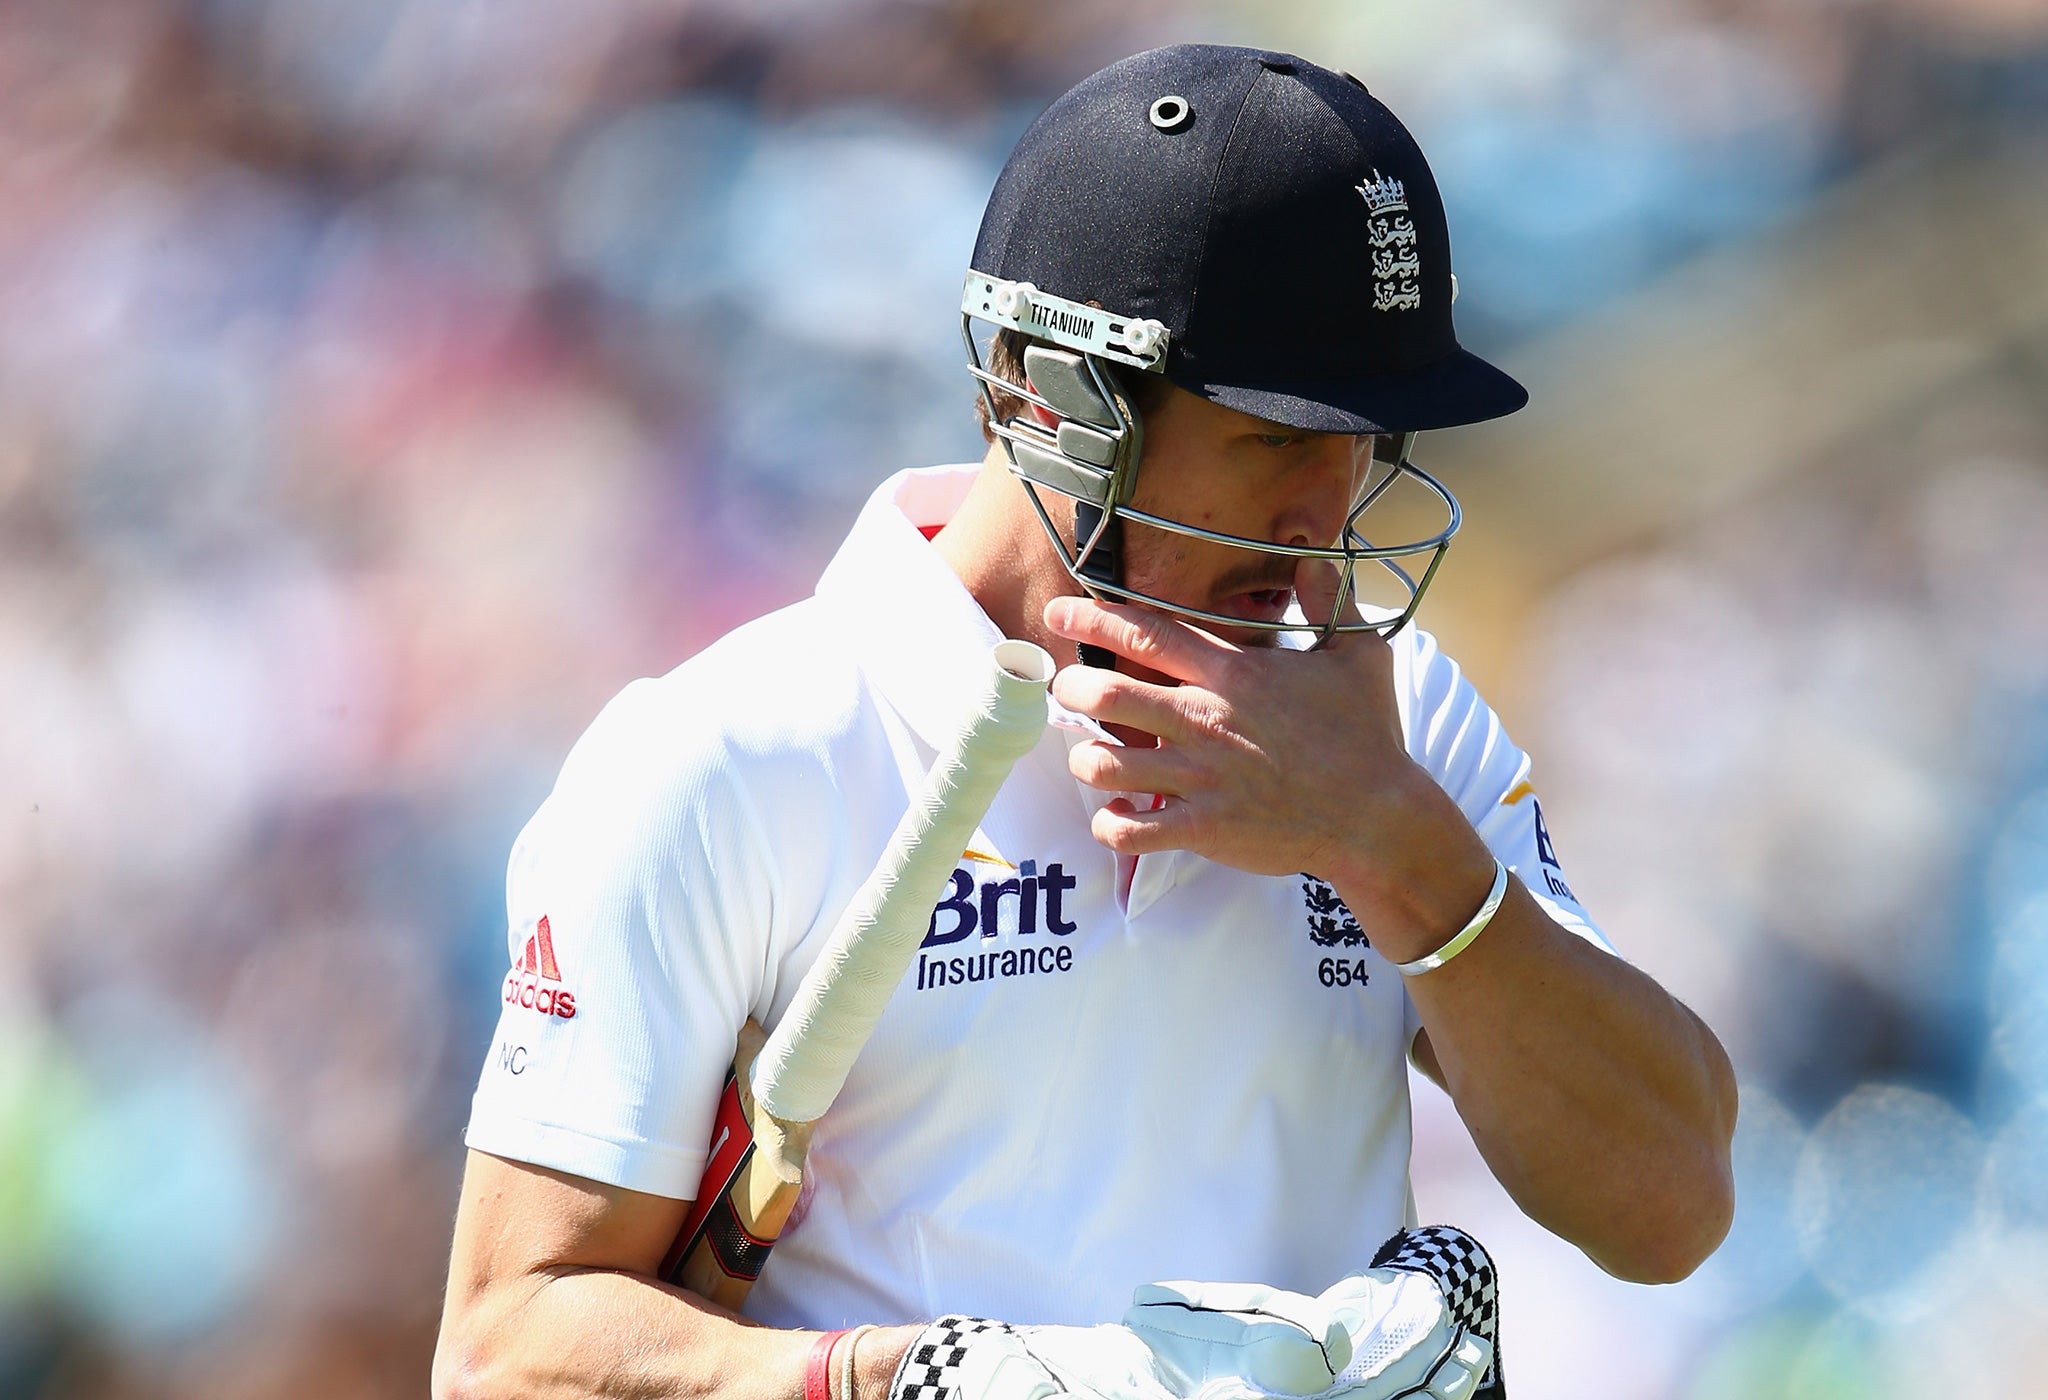 England’s selectors should be giving Nick Compton serious consideration once again